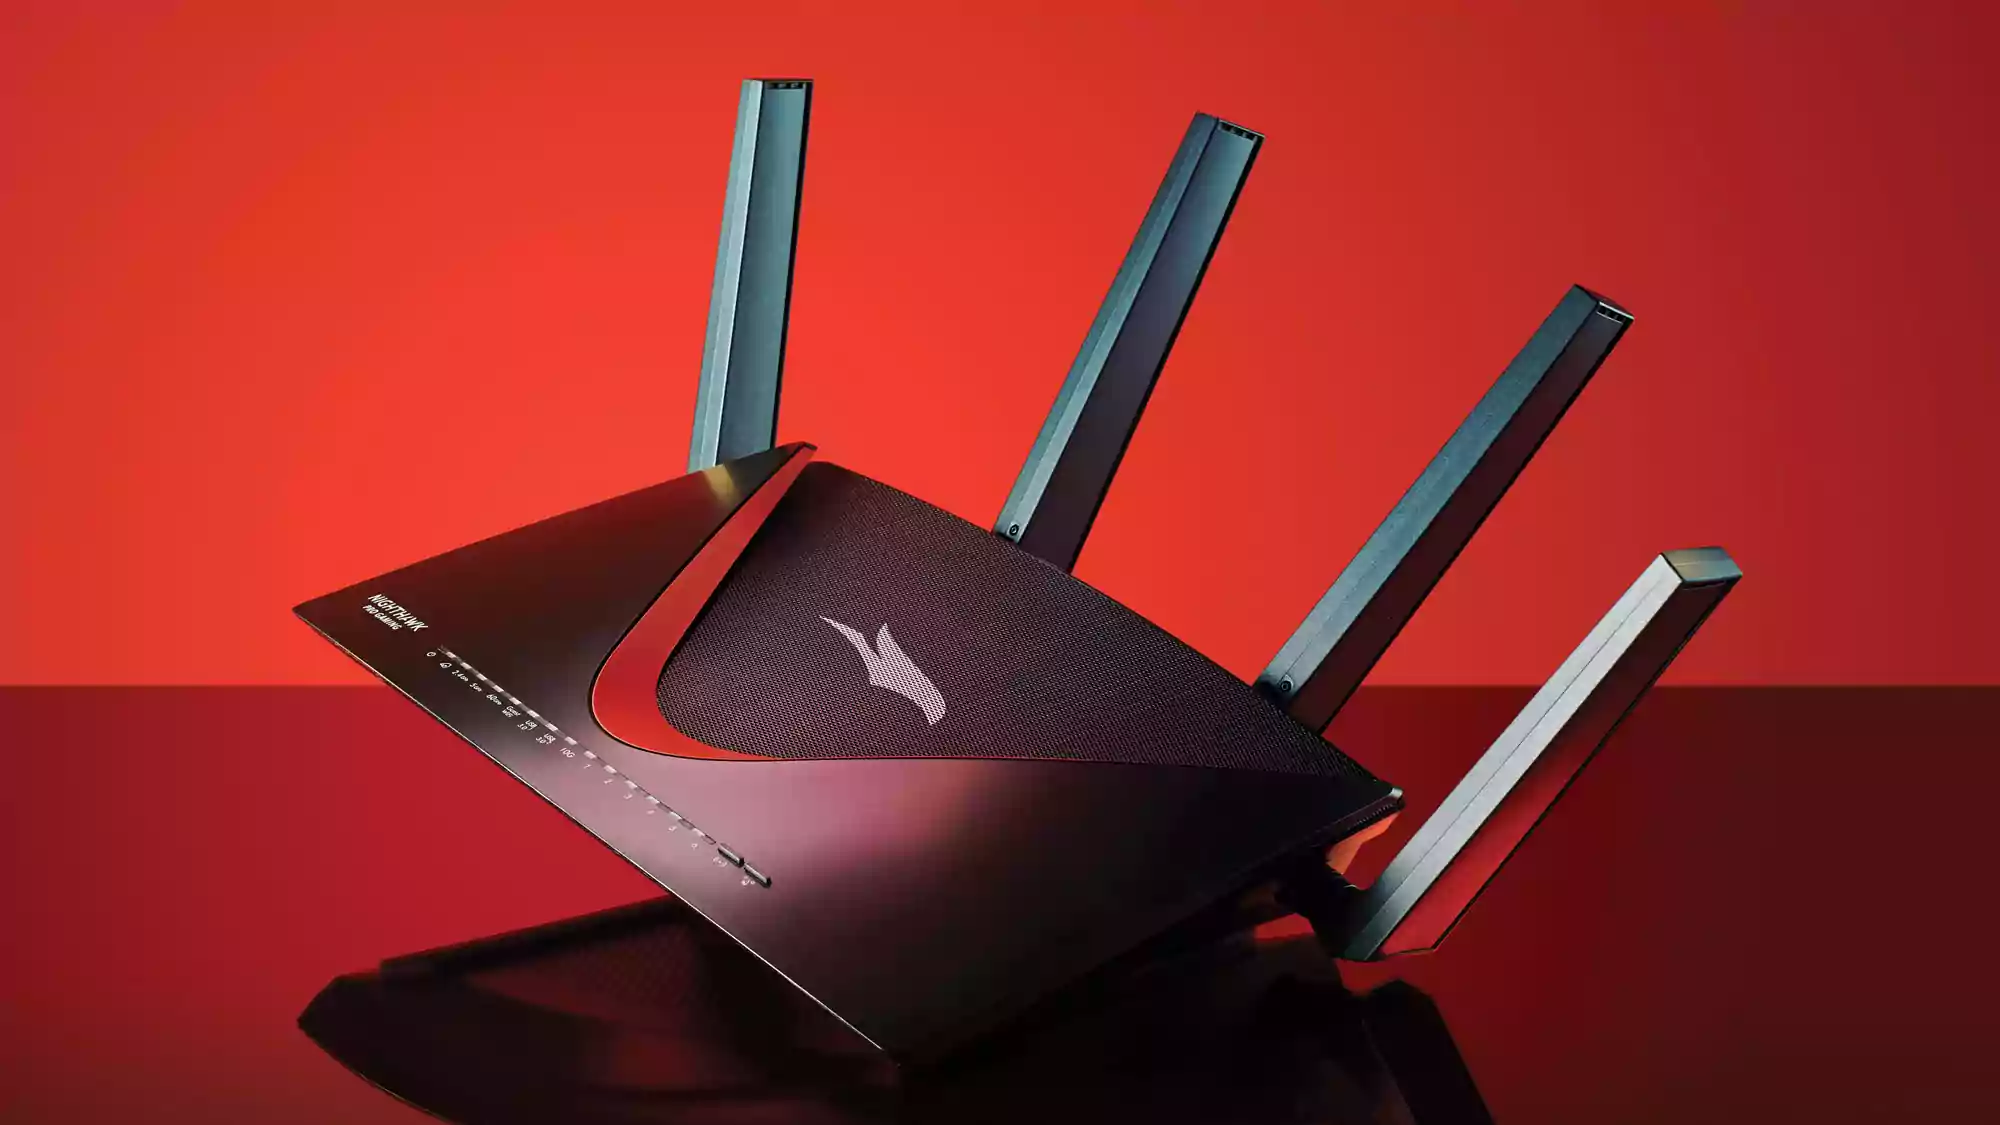 Top 3 best gaming routers in 2020